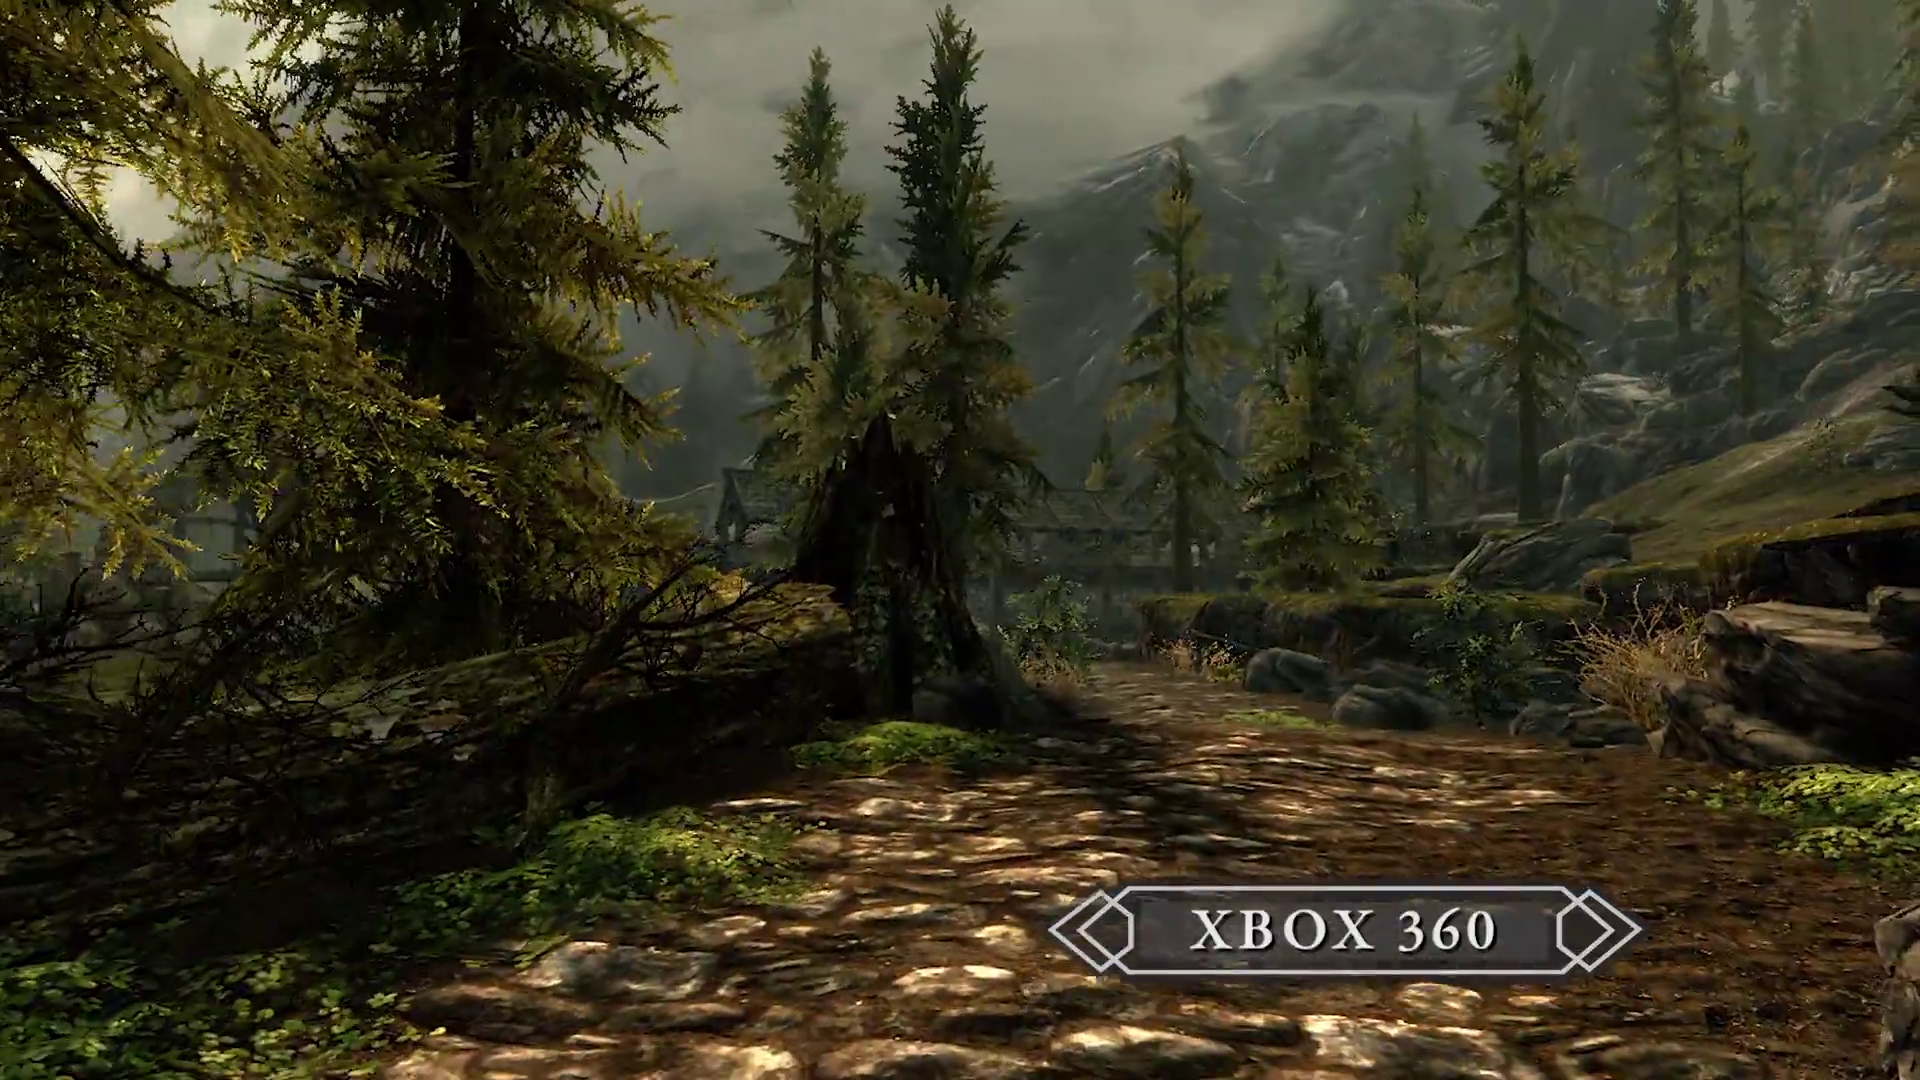 Opstand lichtgewicht personeelszaken Skyrim comes to PS4 and Xbox One this fall - Polygon